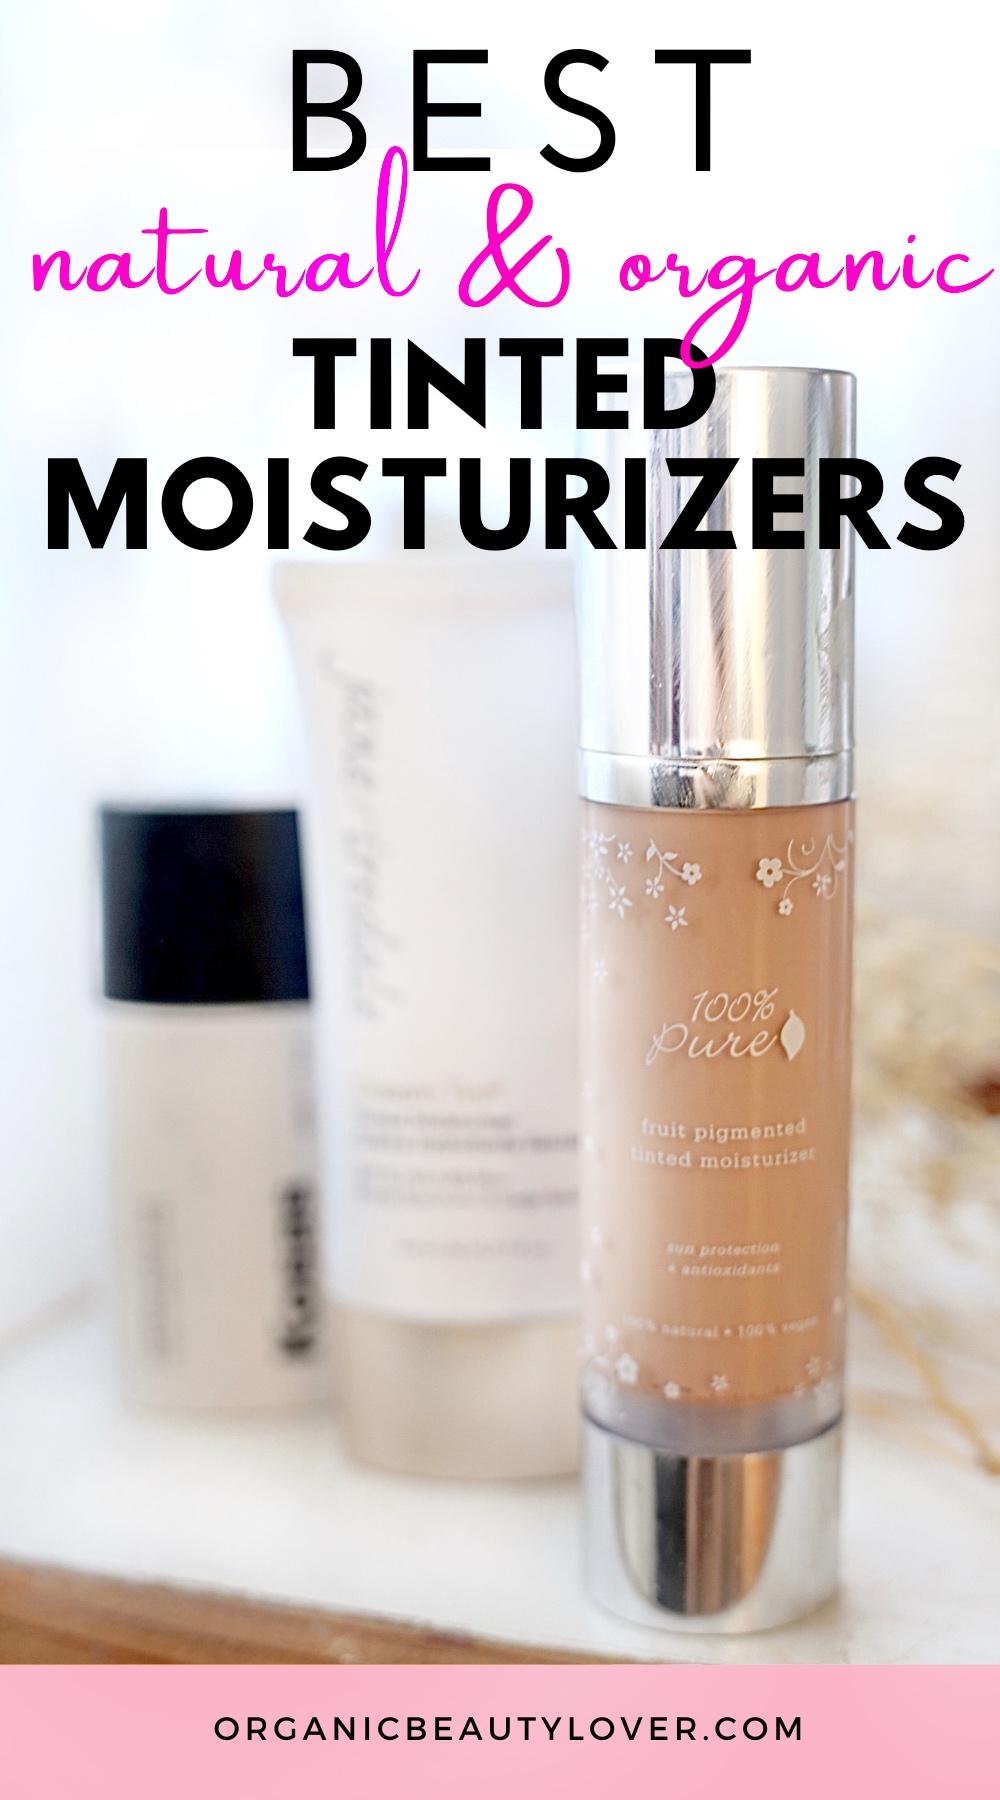 Best Natural & Organic Tinted Moisturizers